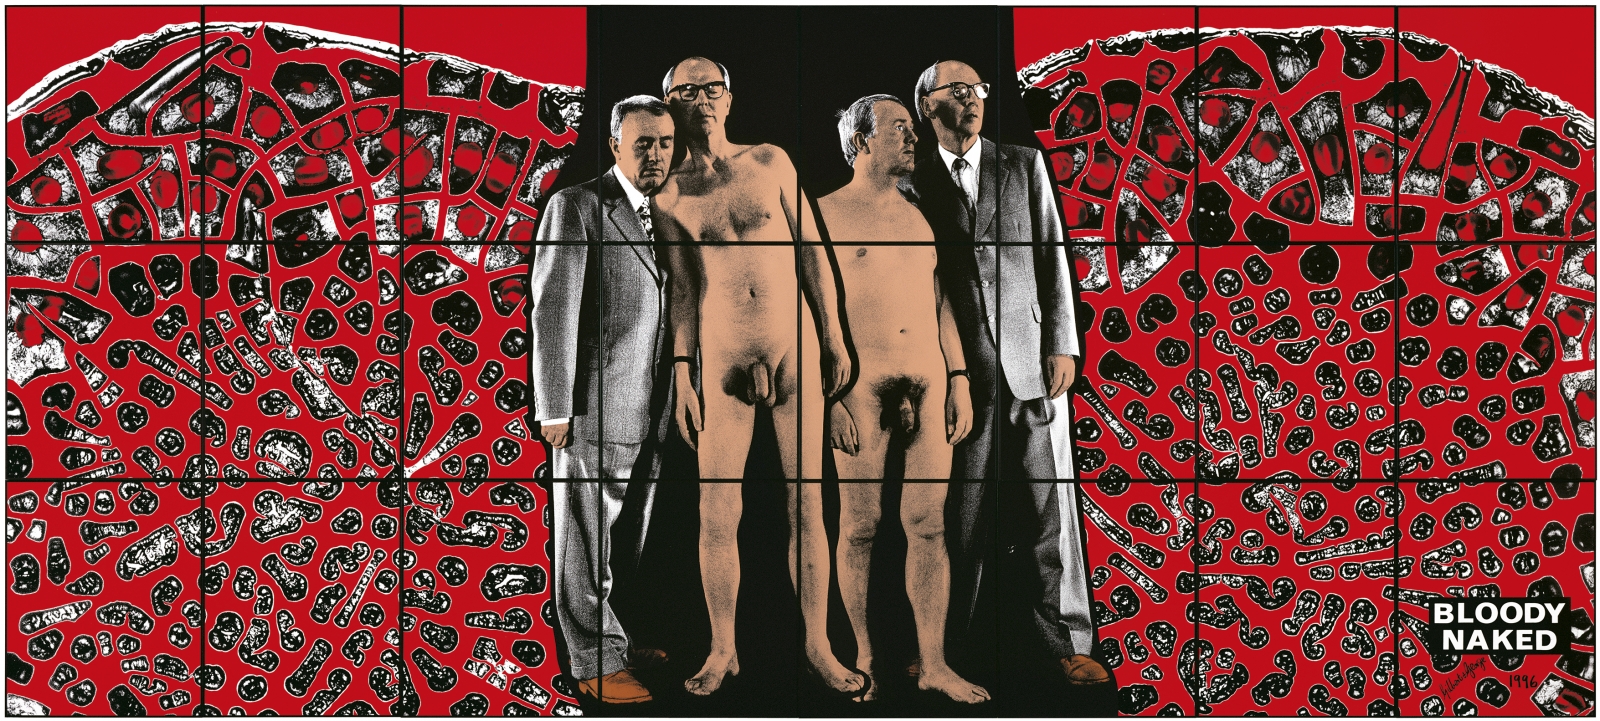 GILBERT &amp;amp; GEORGE, Bloody Naked, 1996